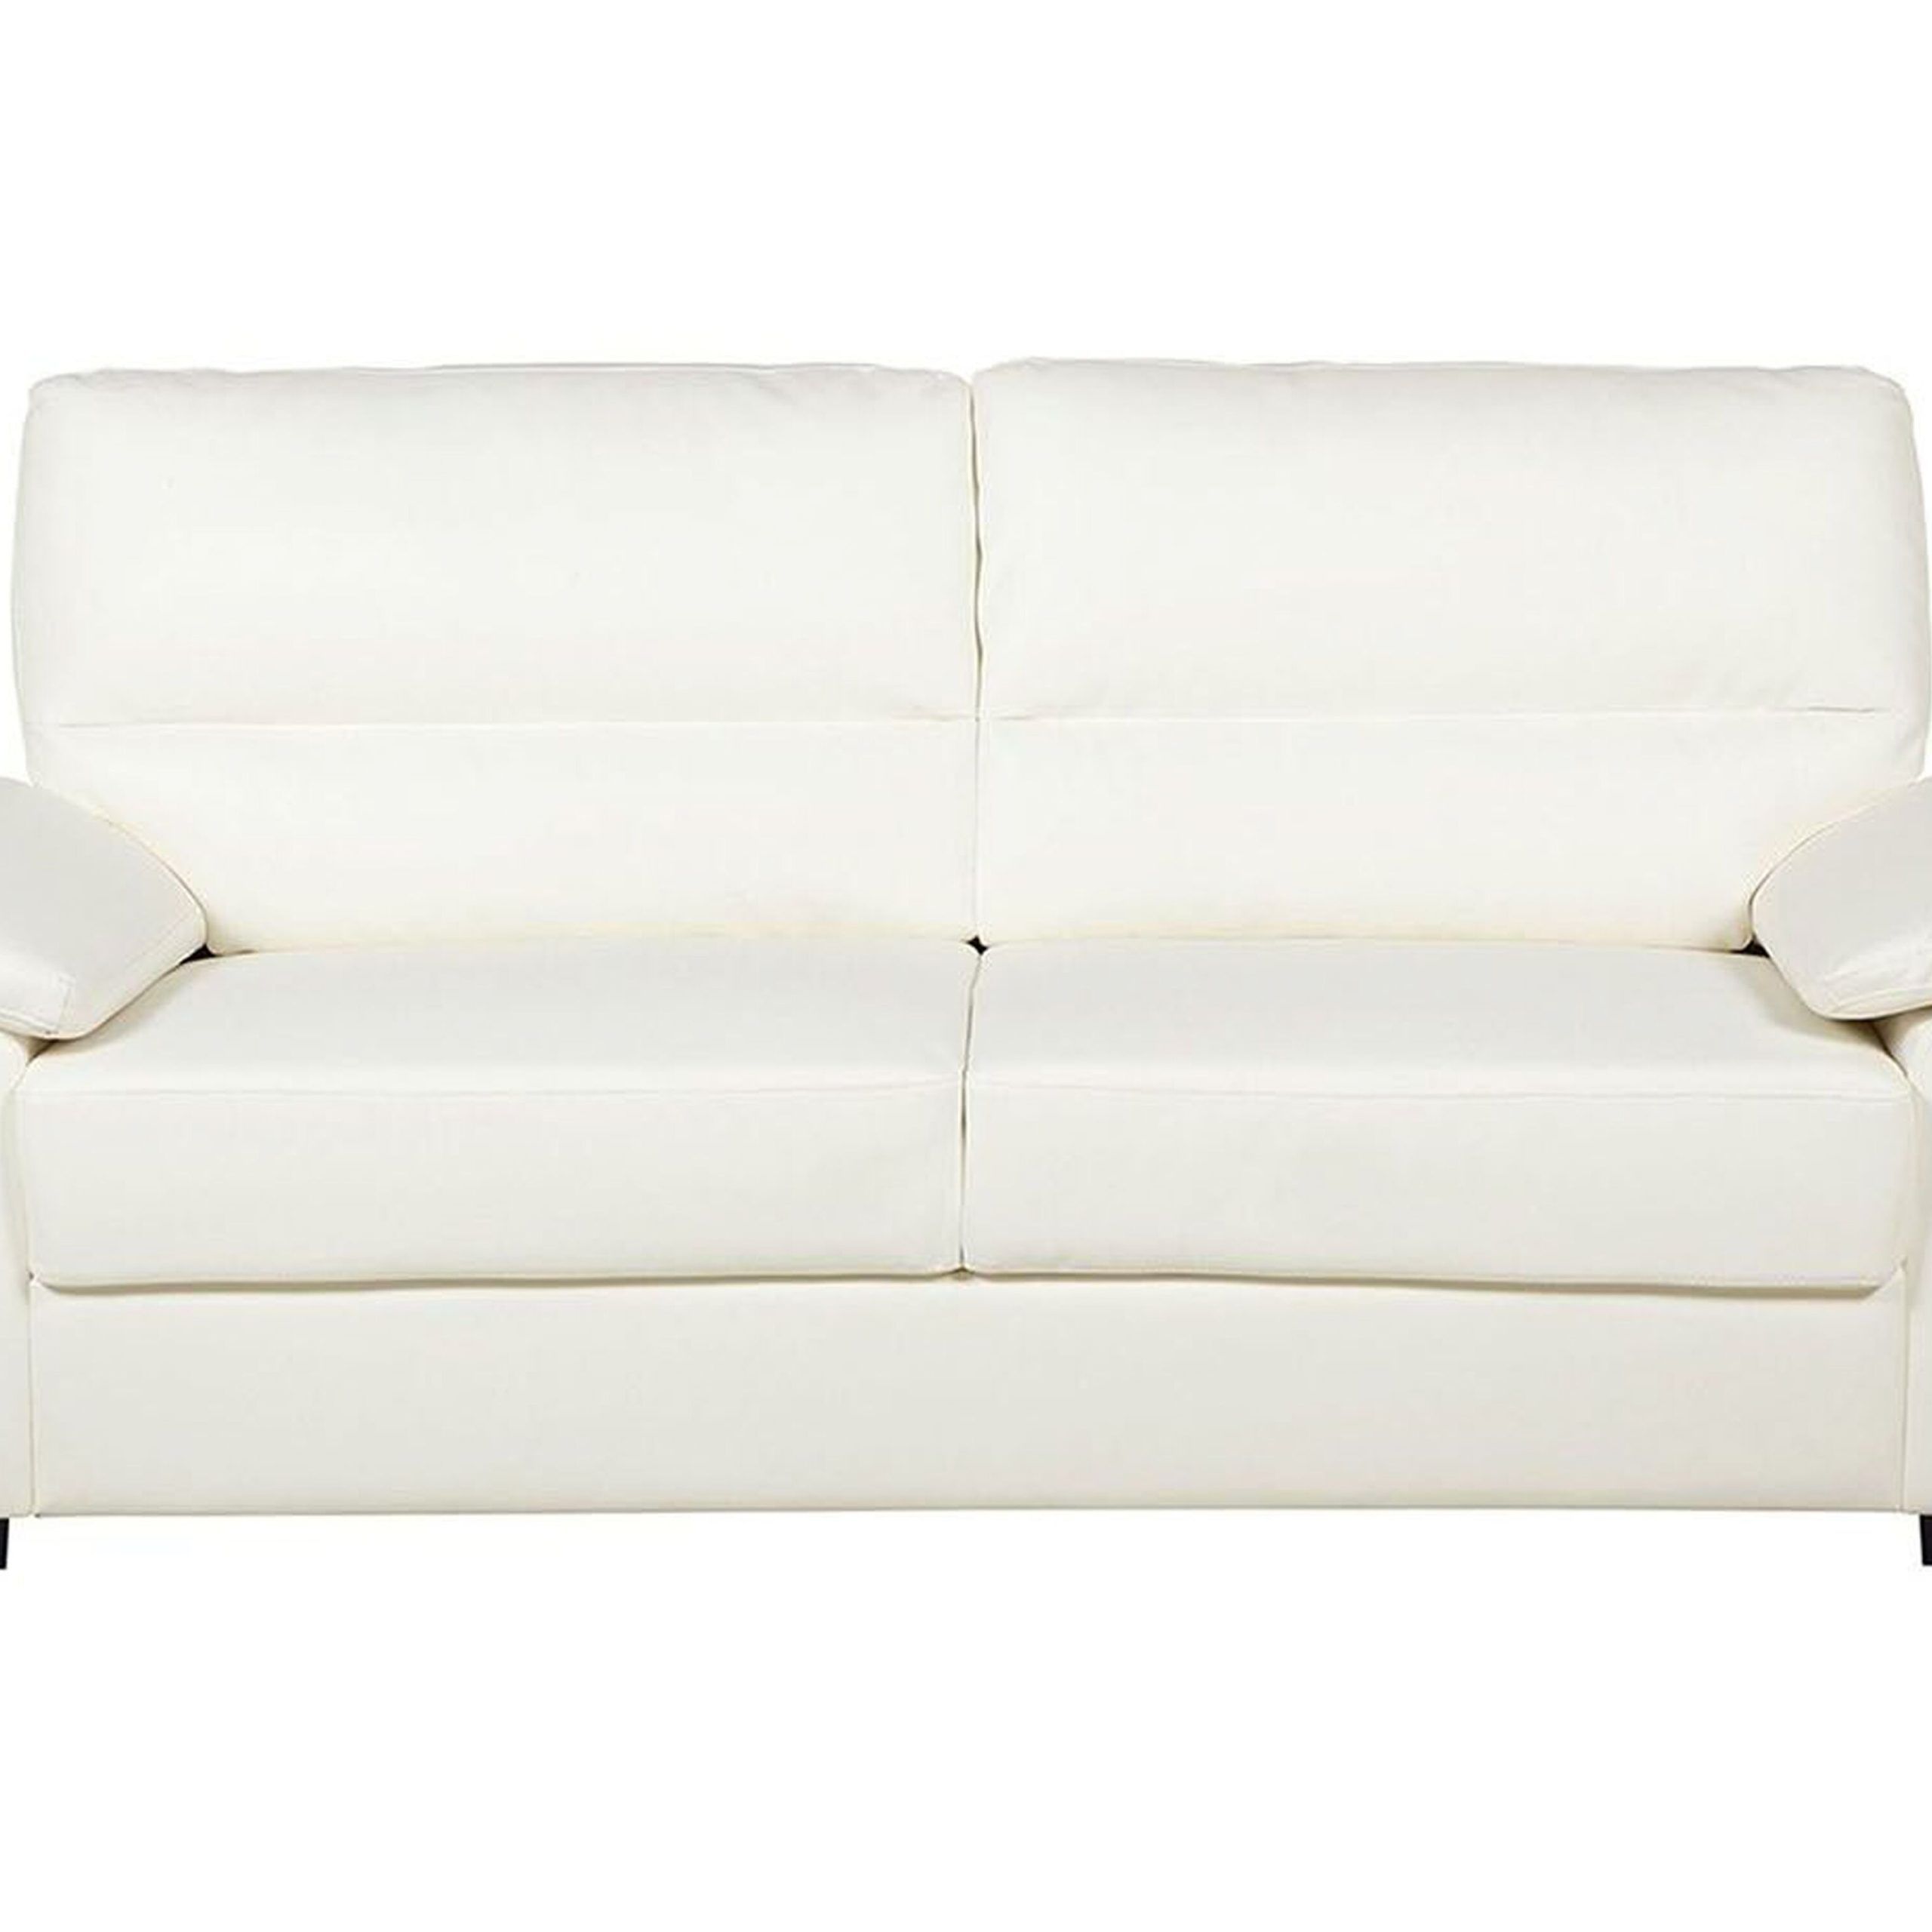 3 Seater Faux Leather Sofa Cream Vogar | Beliani.co.uk Throughout Traditional 3 Seater Faux Leather Sofas (Gallery 11 of 20)